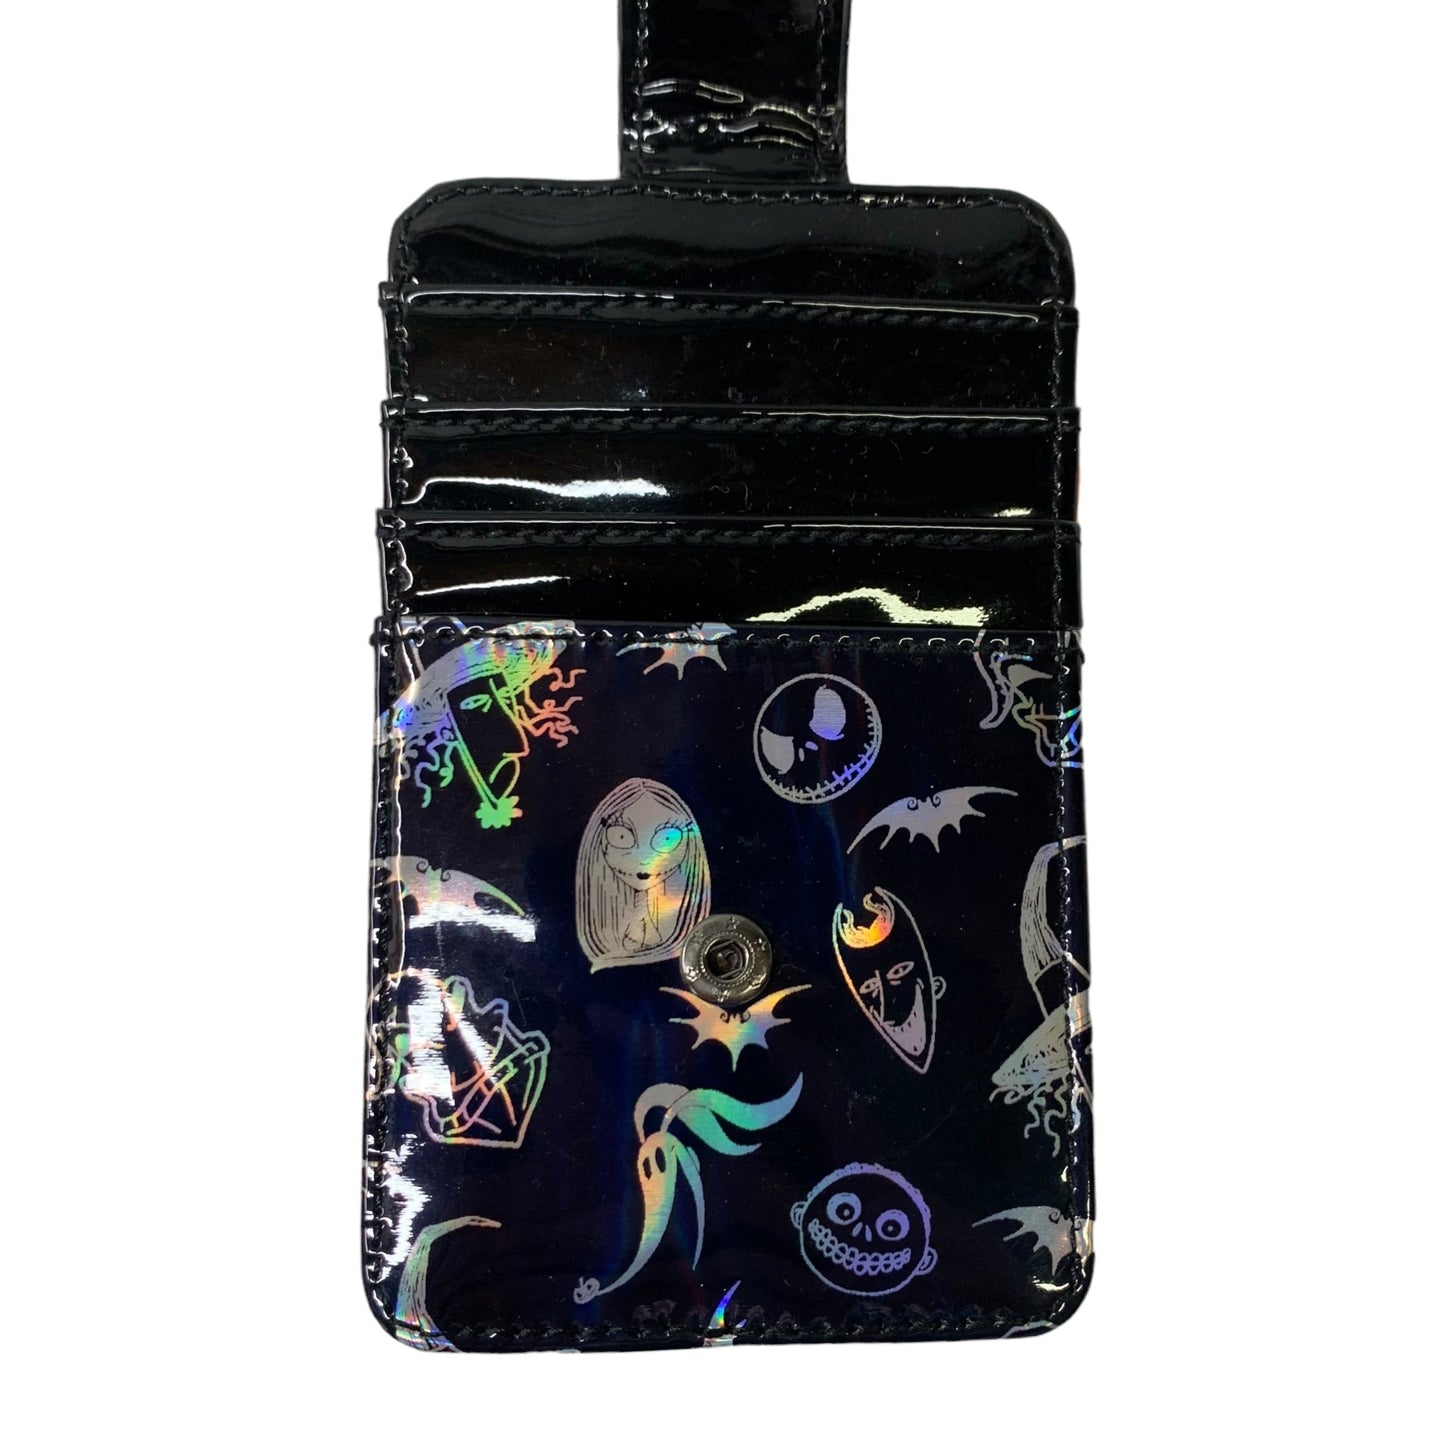 Id/card Holder By Disney Store